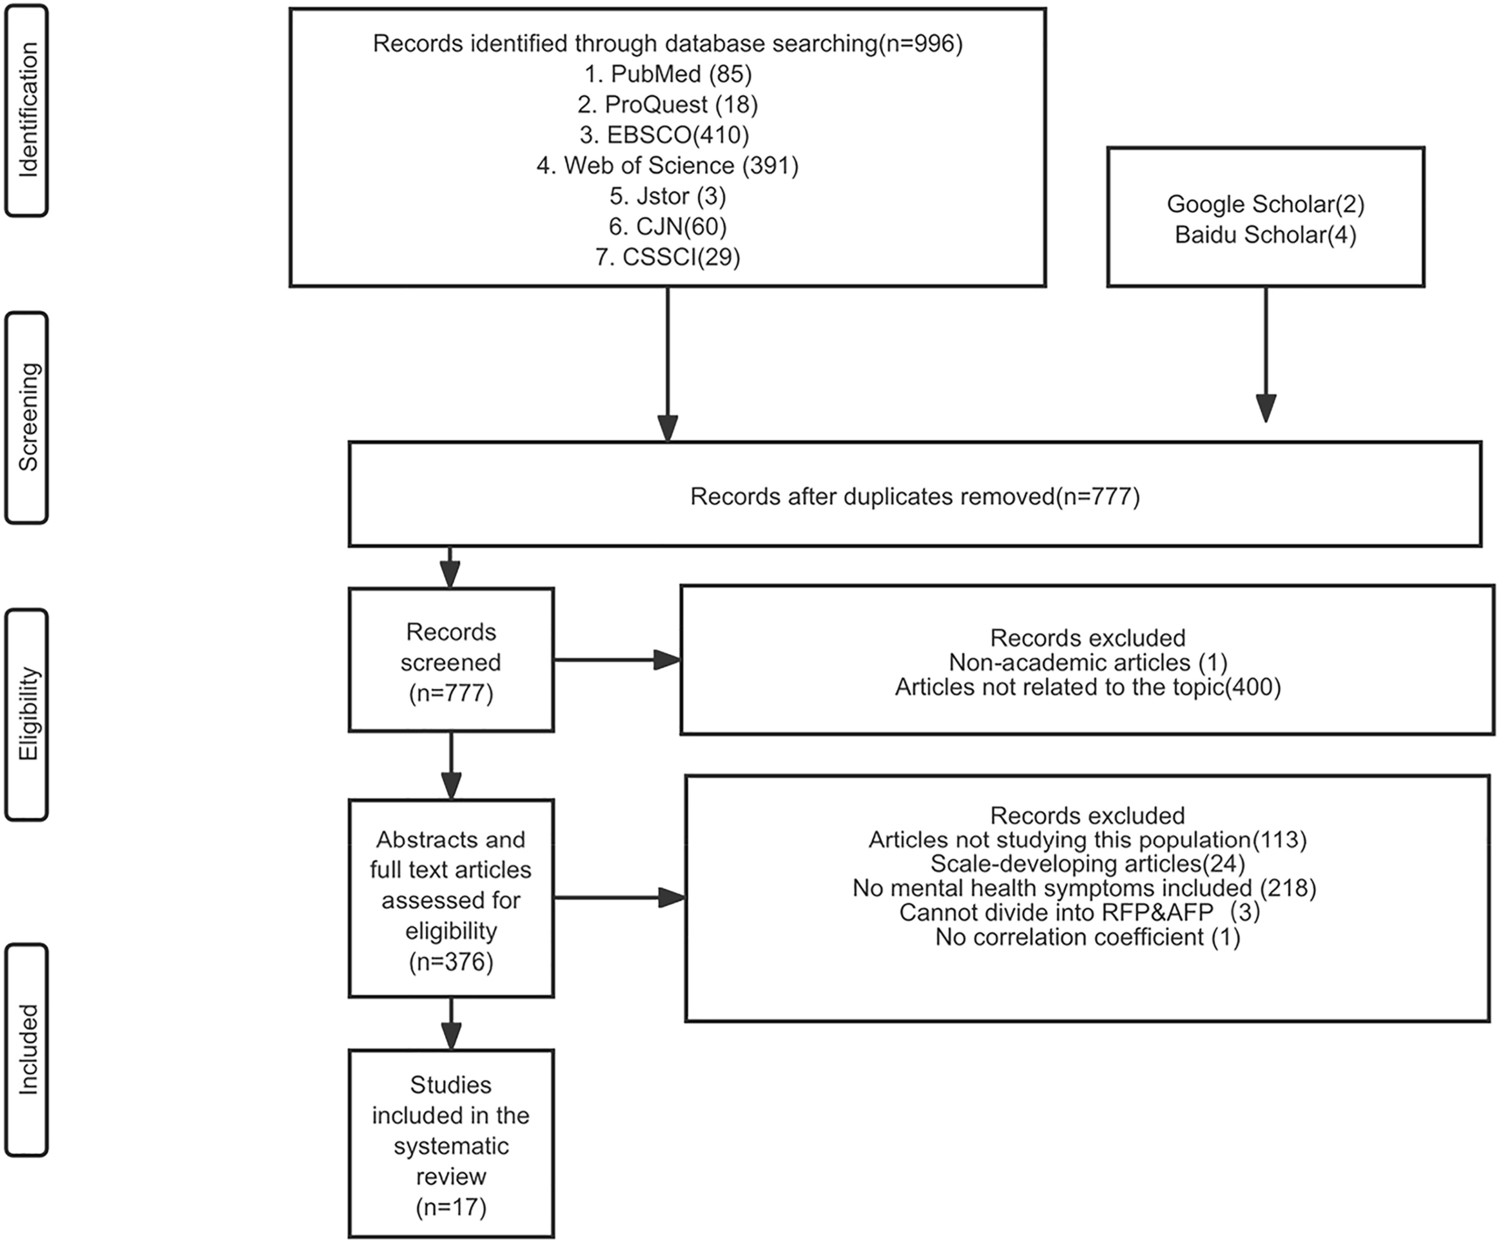 The Relationship Between Dual Filial Piety and Mental Disorders and Symptoms Among Adolescents: A Systematic Review of Quantitative and Qualitative Studies